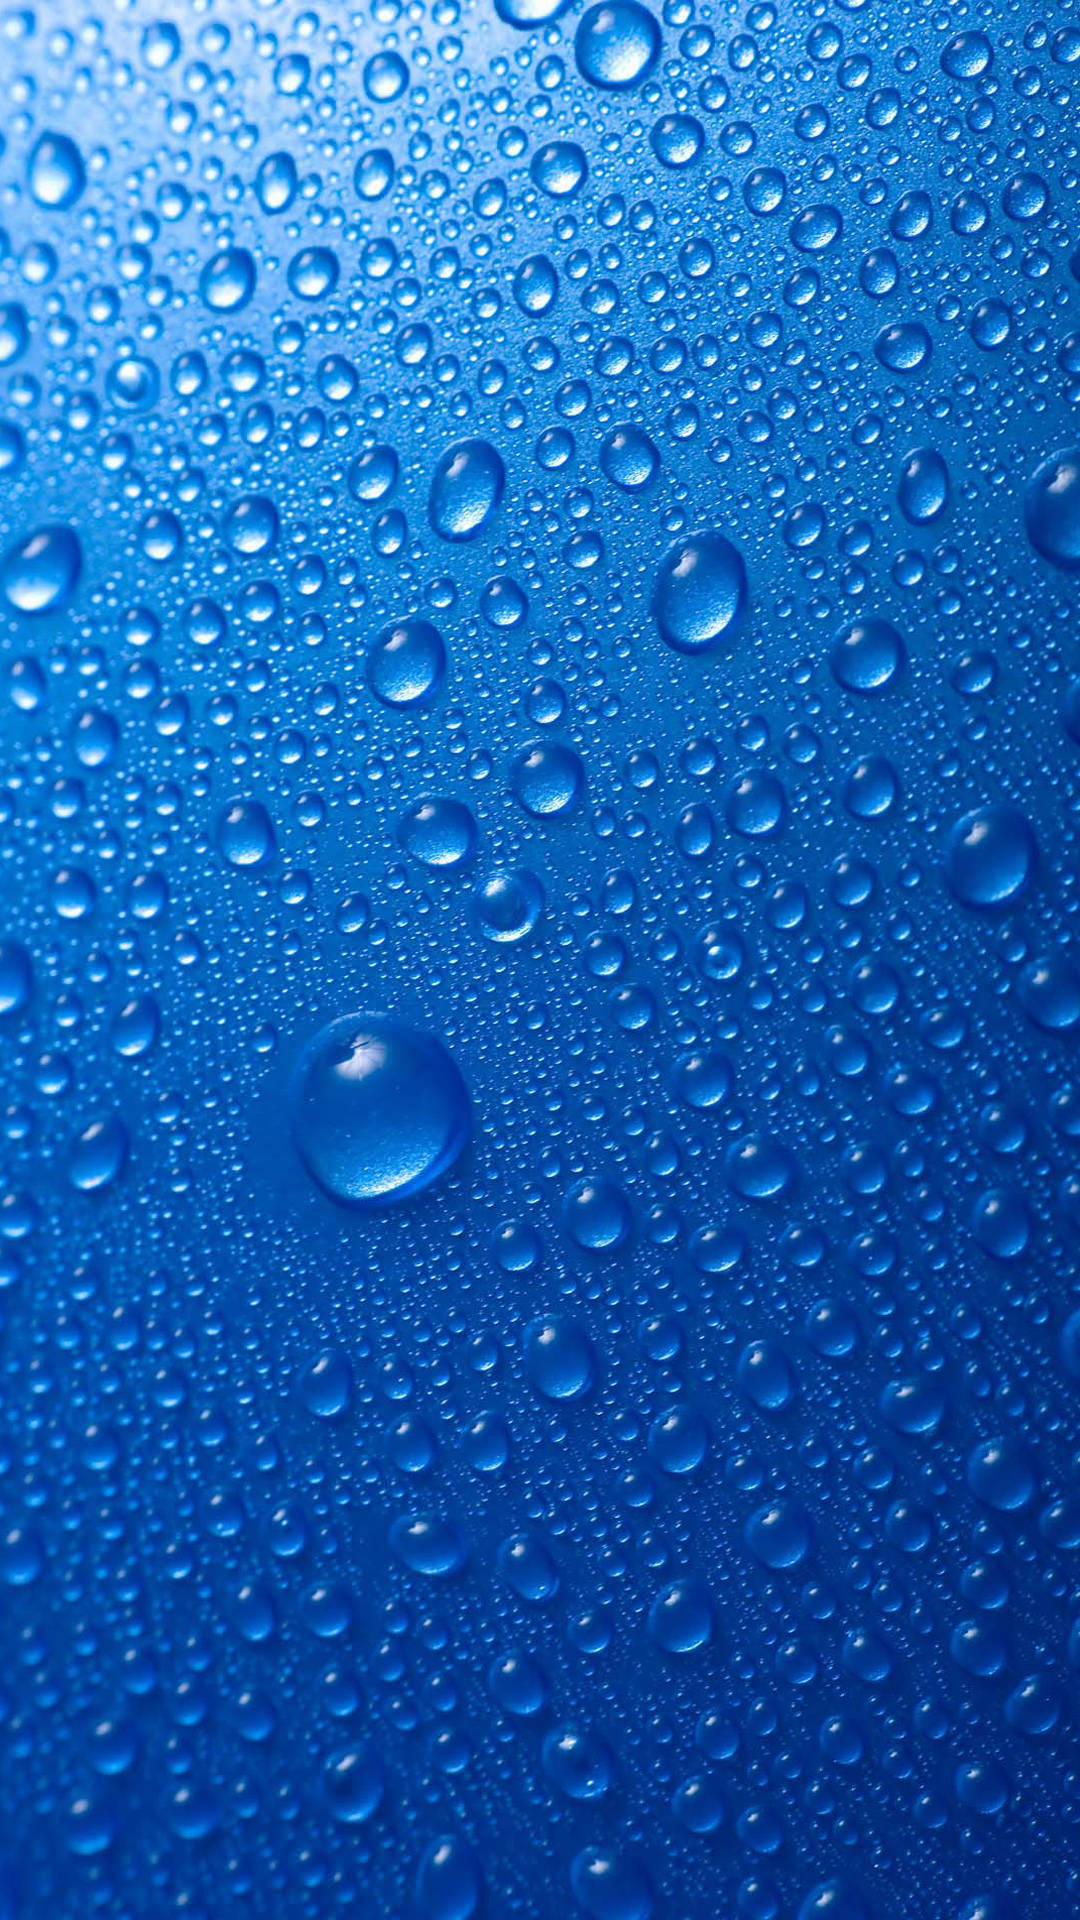 Blue and clean water drop HD samsung galaxy s4 wallpaper